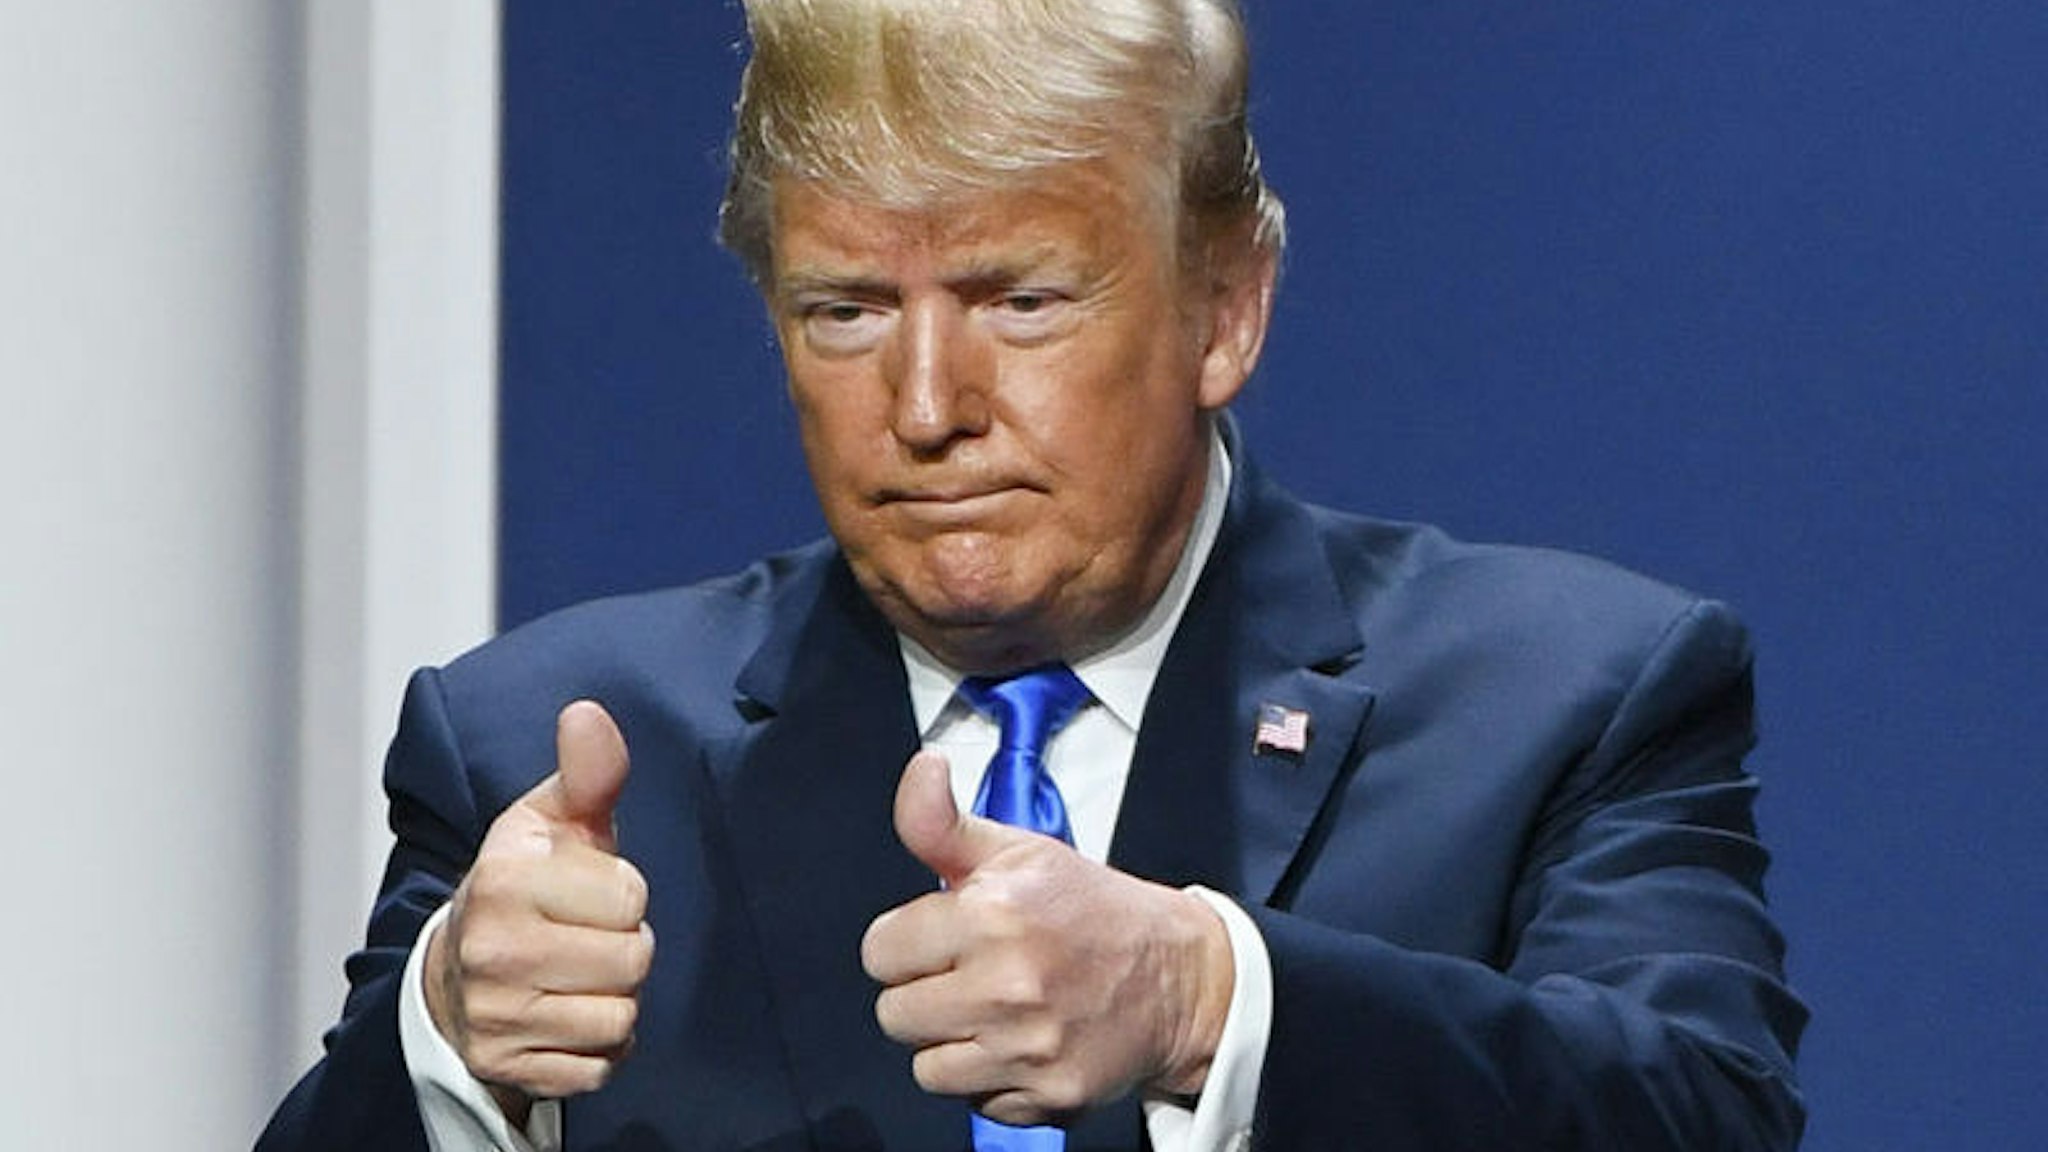 U.S. President Donald Trump gestures after speaking during the Republican Jewish Coalition's annual leadership meeting at The Venetian Las Vegas on April 6, 2019 in Las Vegas, Nevada. Trump has cited his moving of the U.S. embassy in Israel to Jerusalem and his decision to pull the U.S. out of the Iran nuclear deal as reasons for Jewish voters to leave the Democratic party and support him and the GOP instead. (Photo by Ethan Miller/Getty Images)